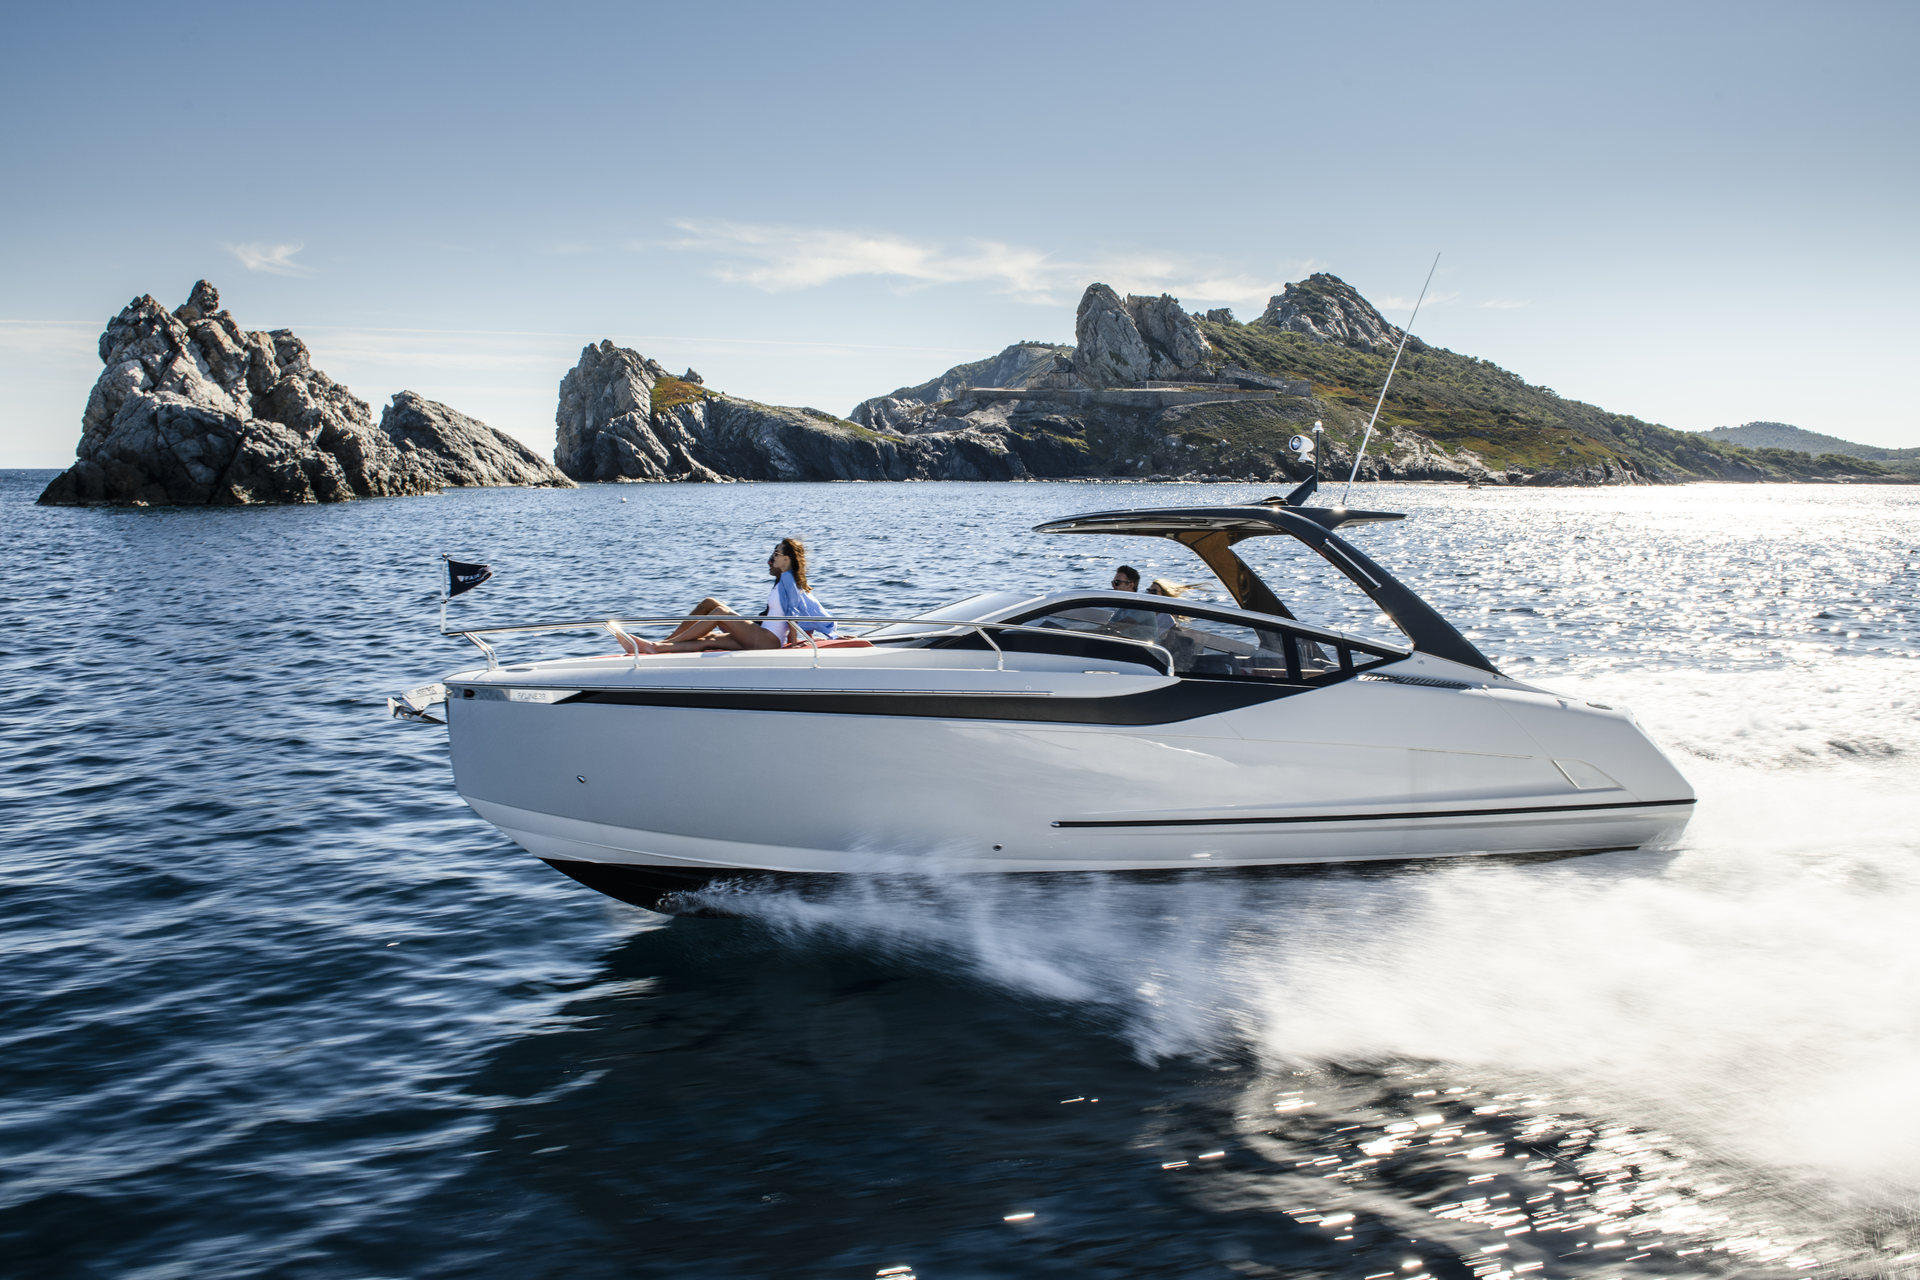 360 VR Virtual Tours of the Fairline F-LINE 33